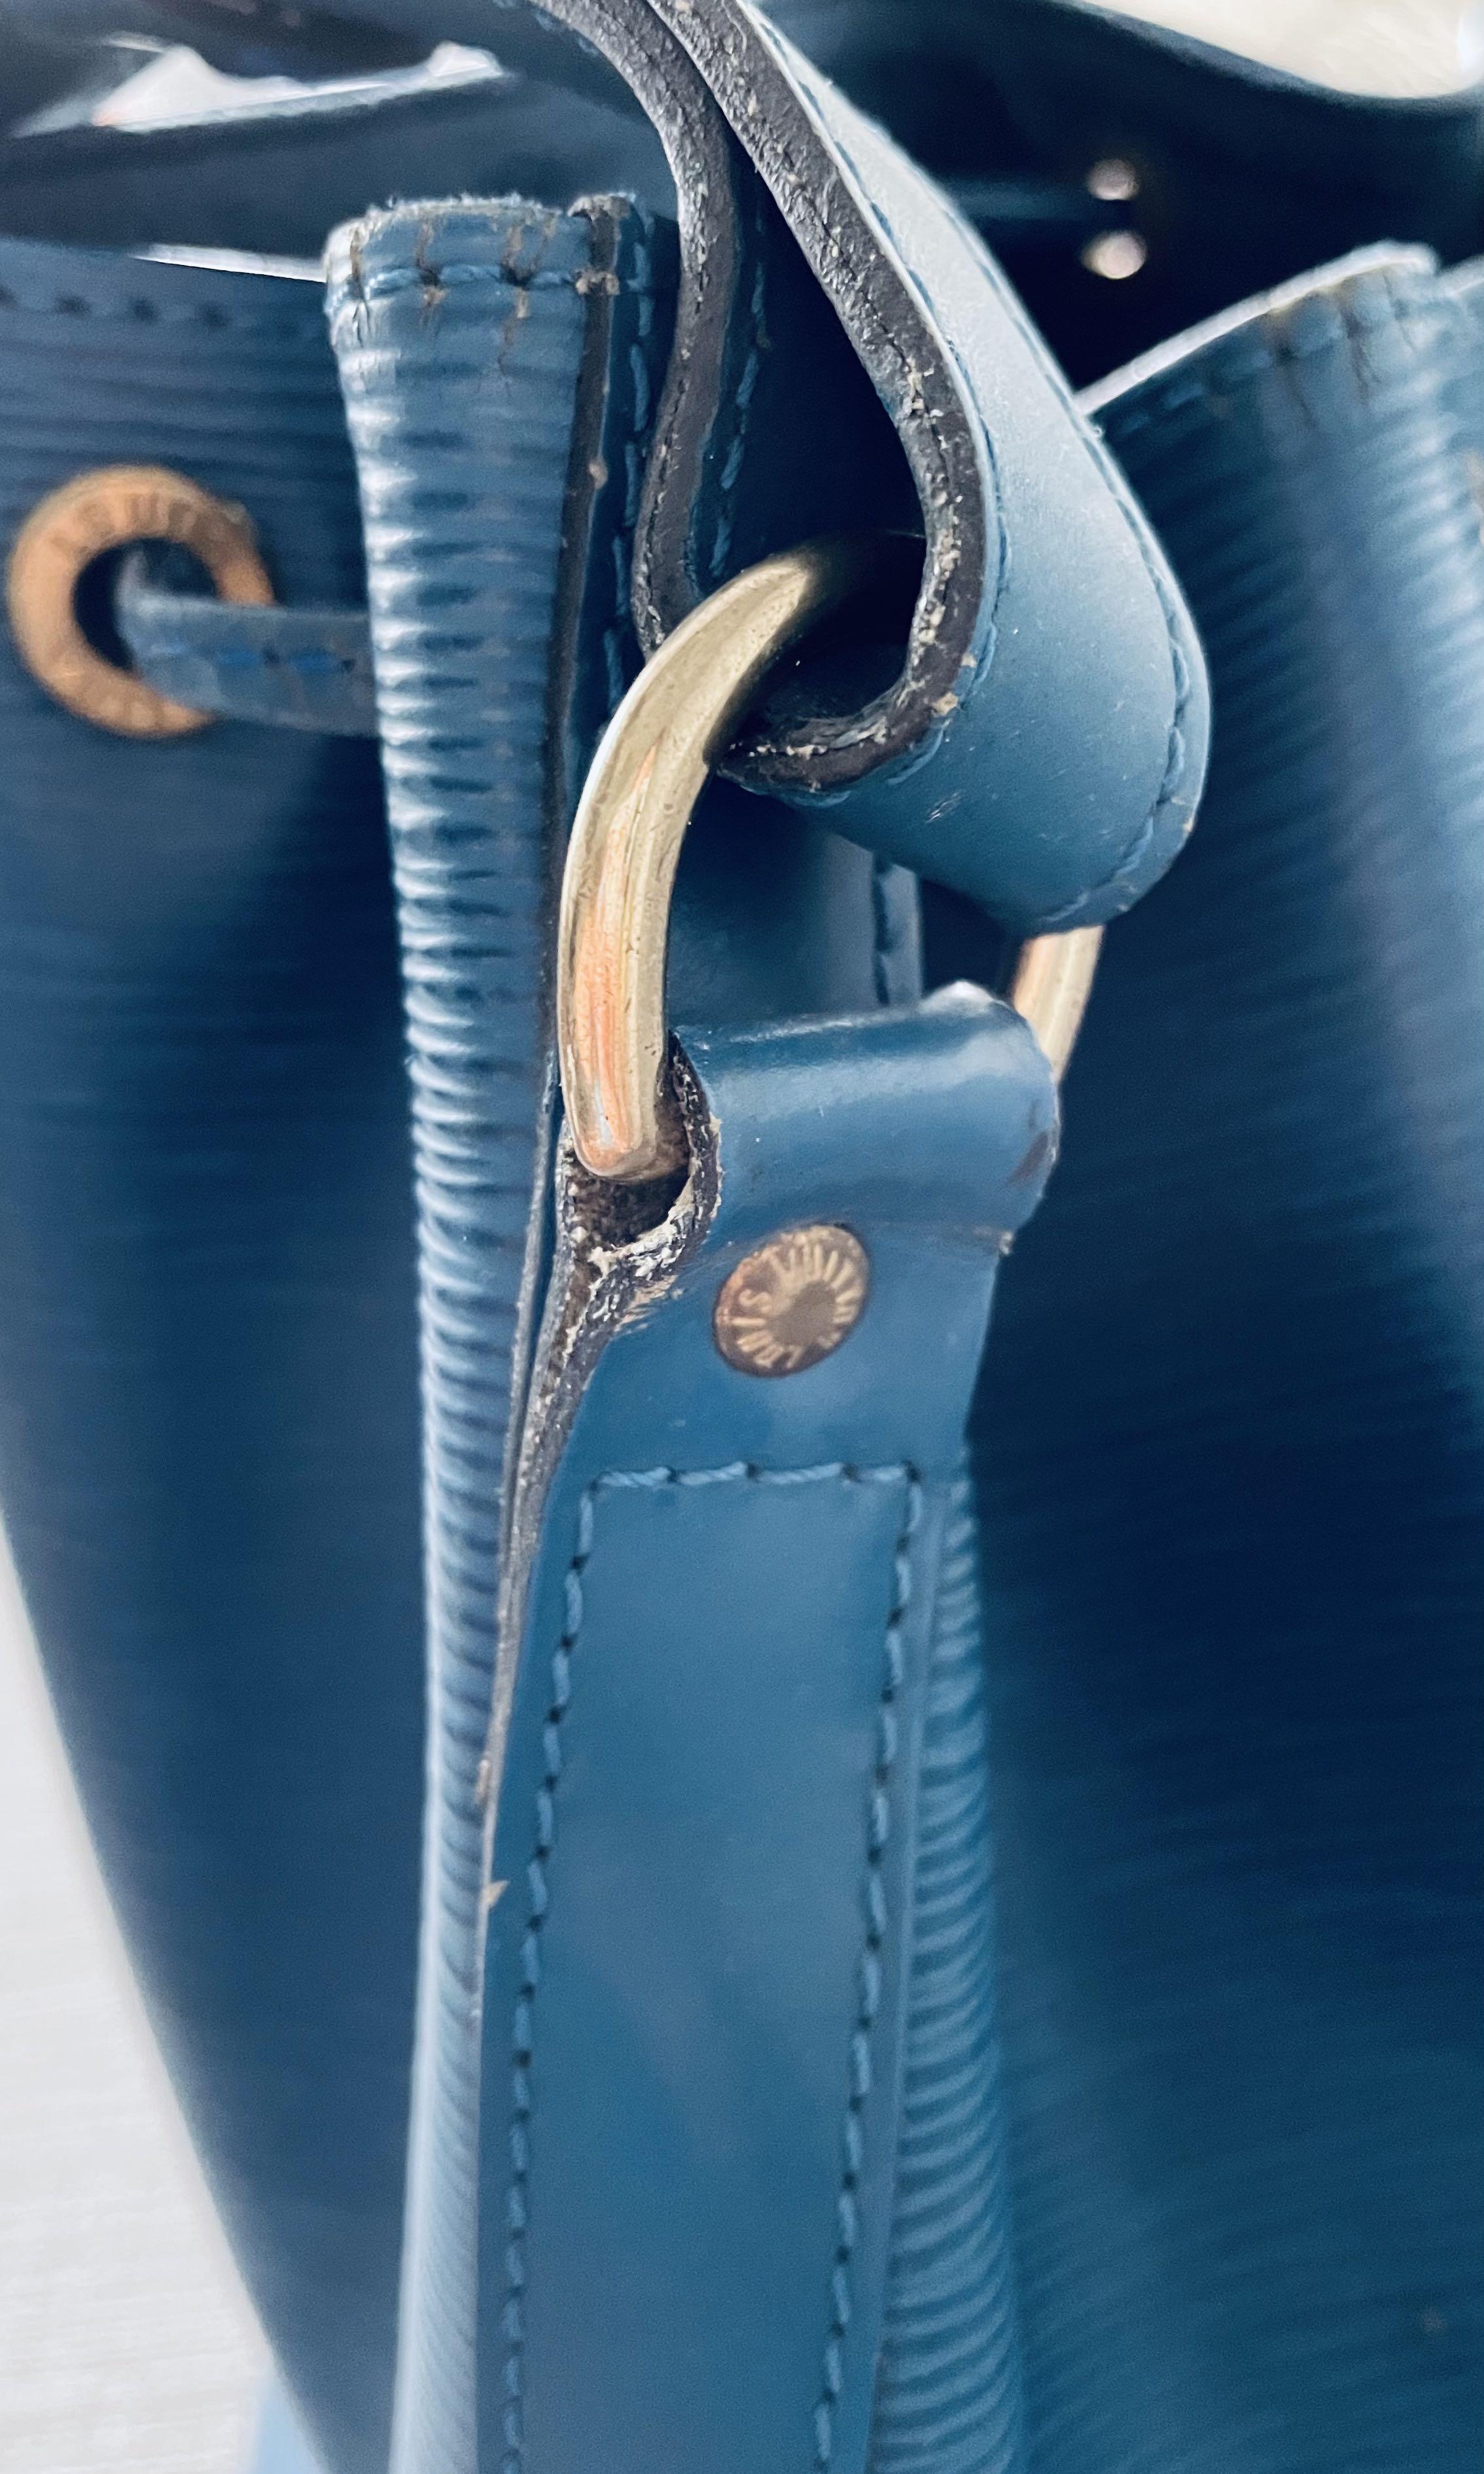 Louis Vuitton on X: Cool in blue. The iconic #LouisVuitton bucket